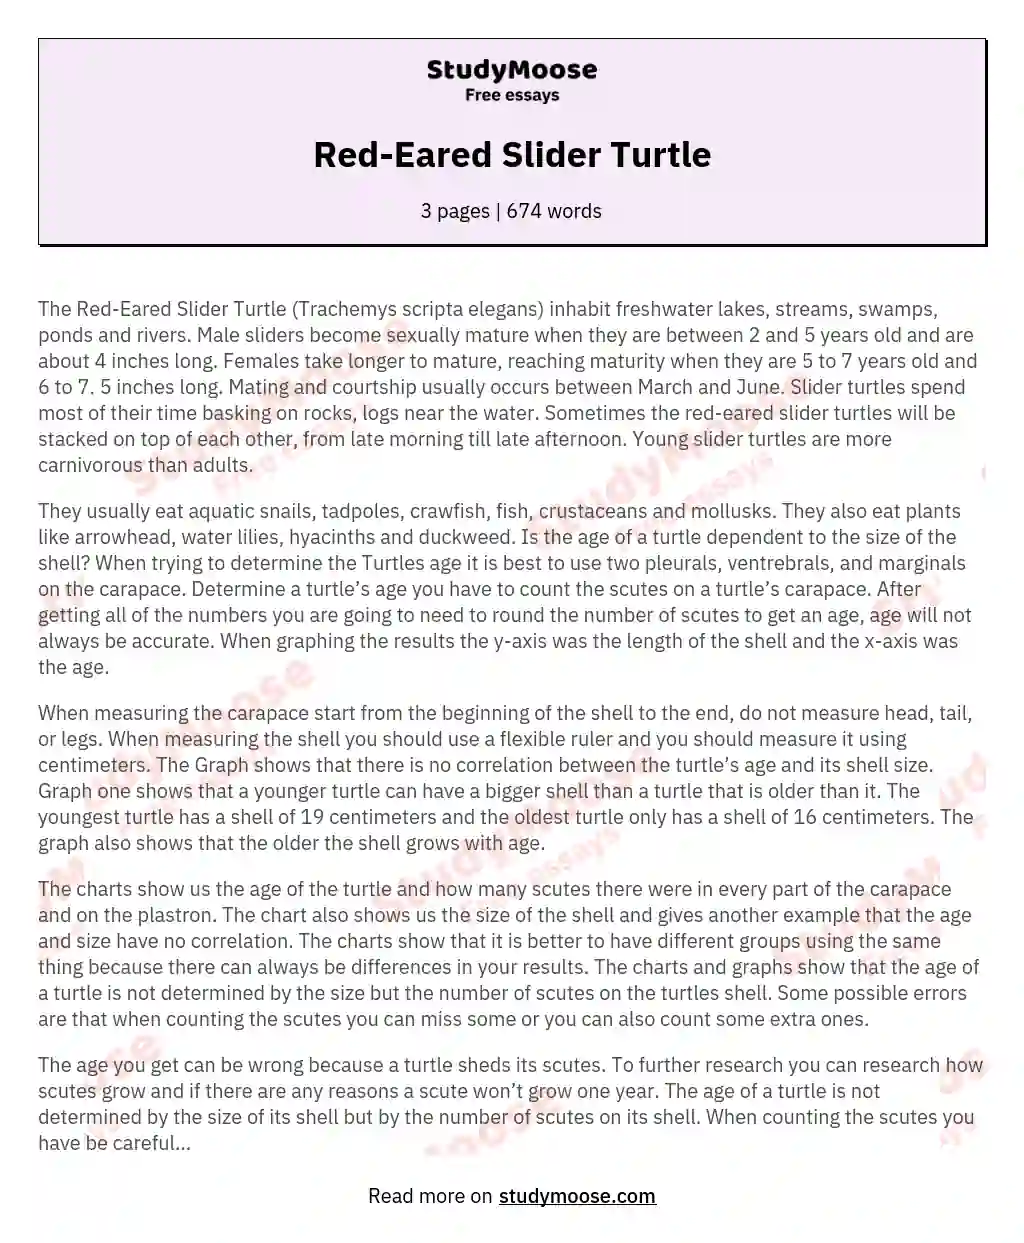 Exploring the Life of the Red-Eared Slider Turtle essay